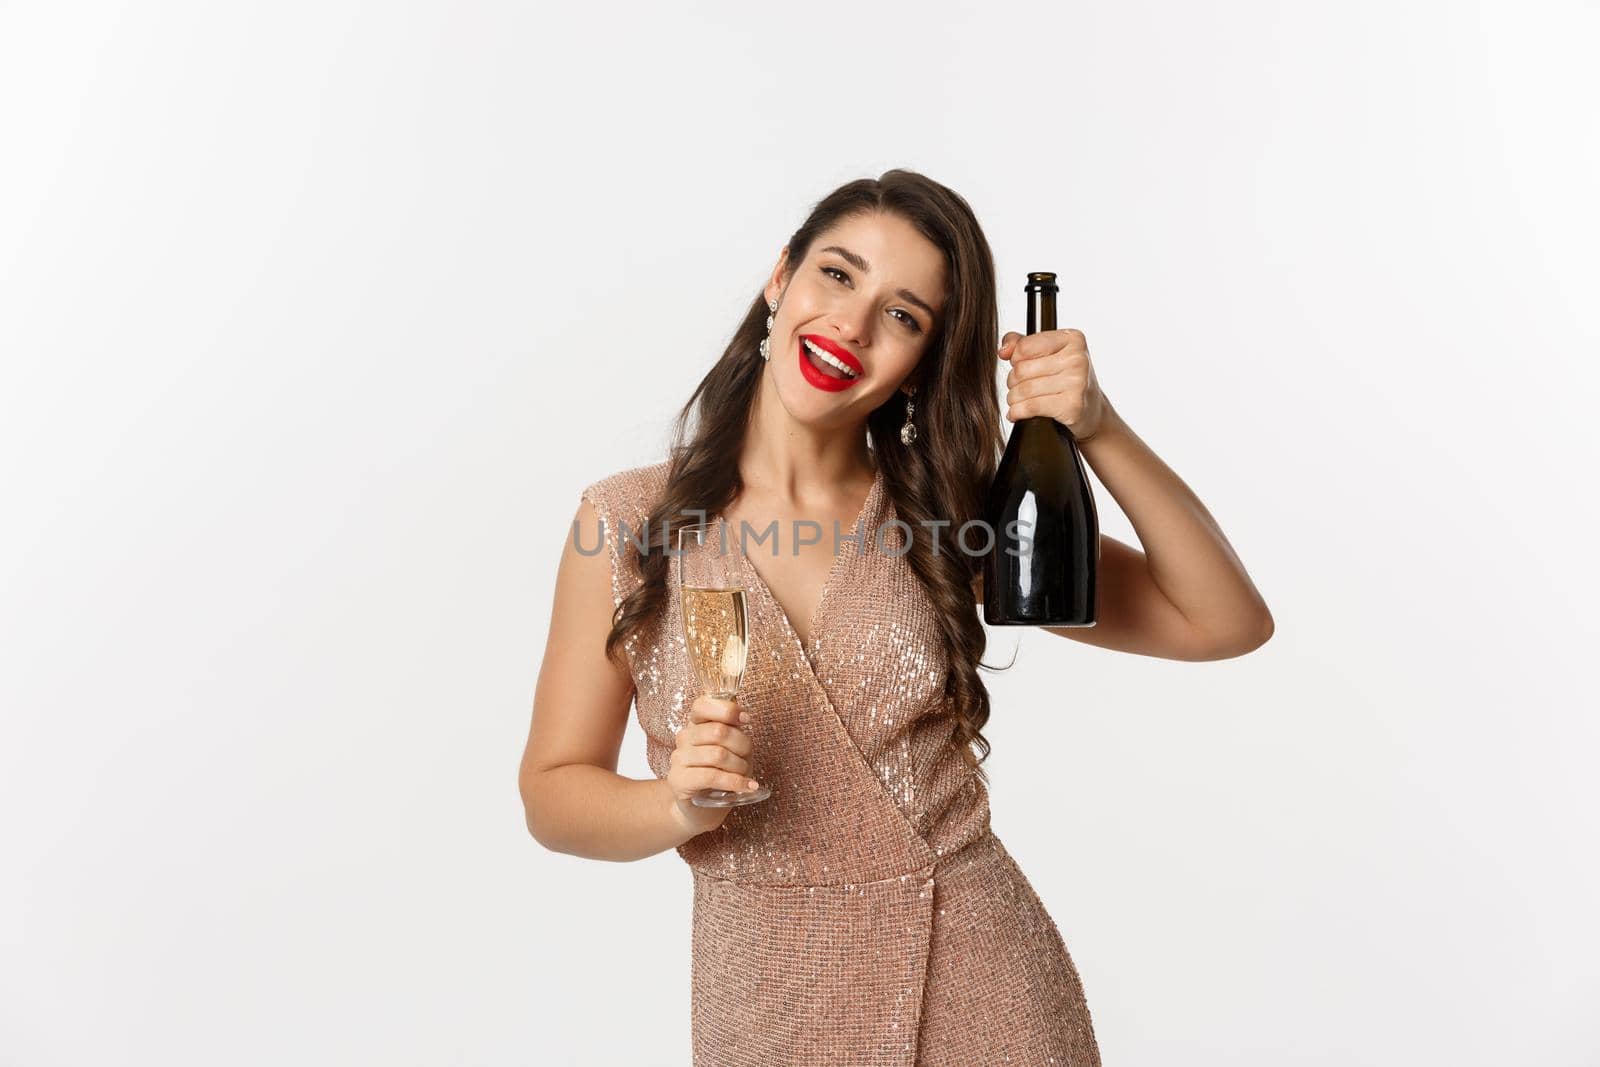 Winter holidays celebration concept. Happy woman on Christmas party saying cheers, raising bottle of champagne and smiling, standing in elegant dress, white background.